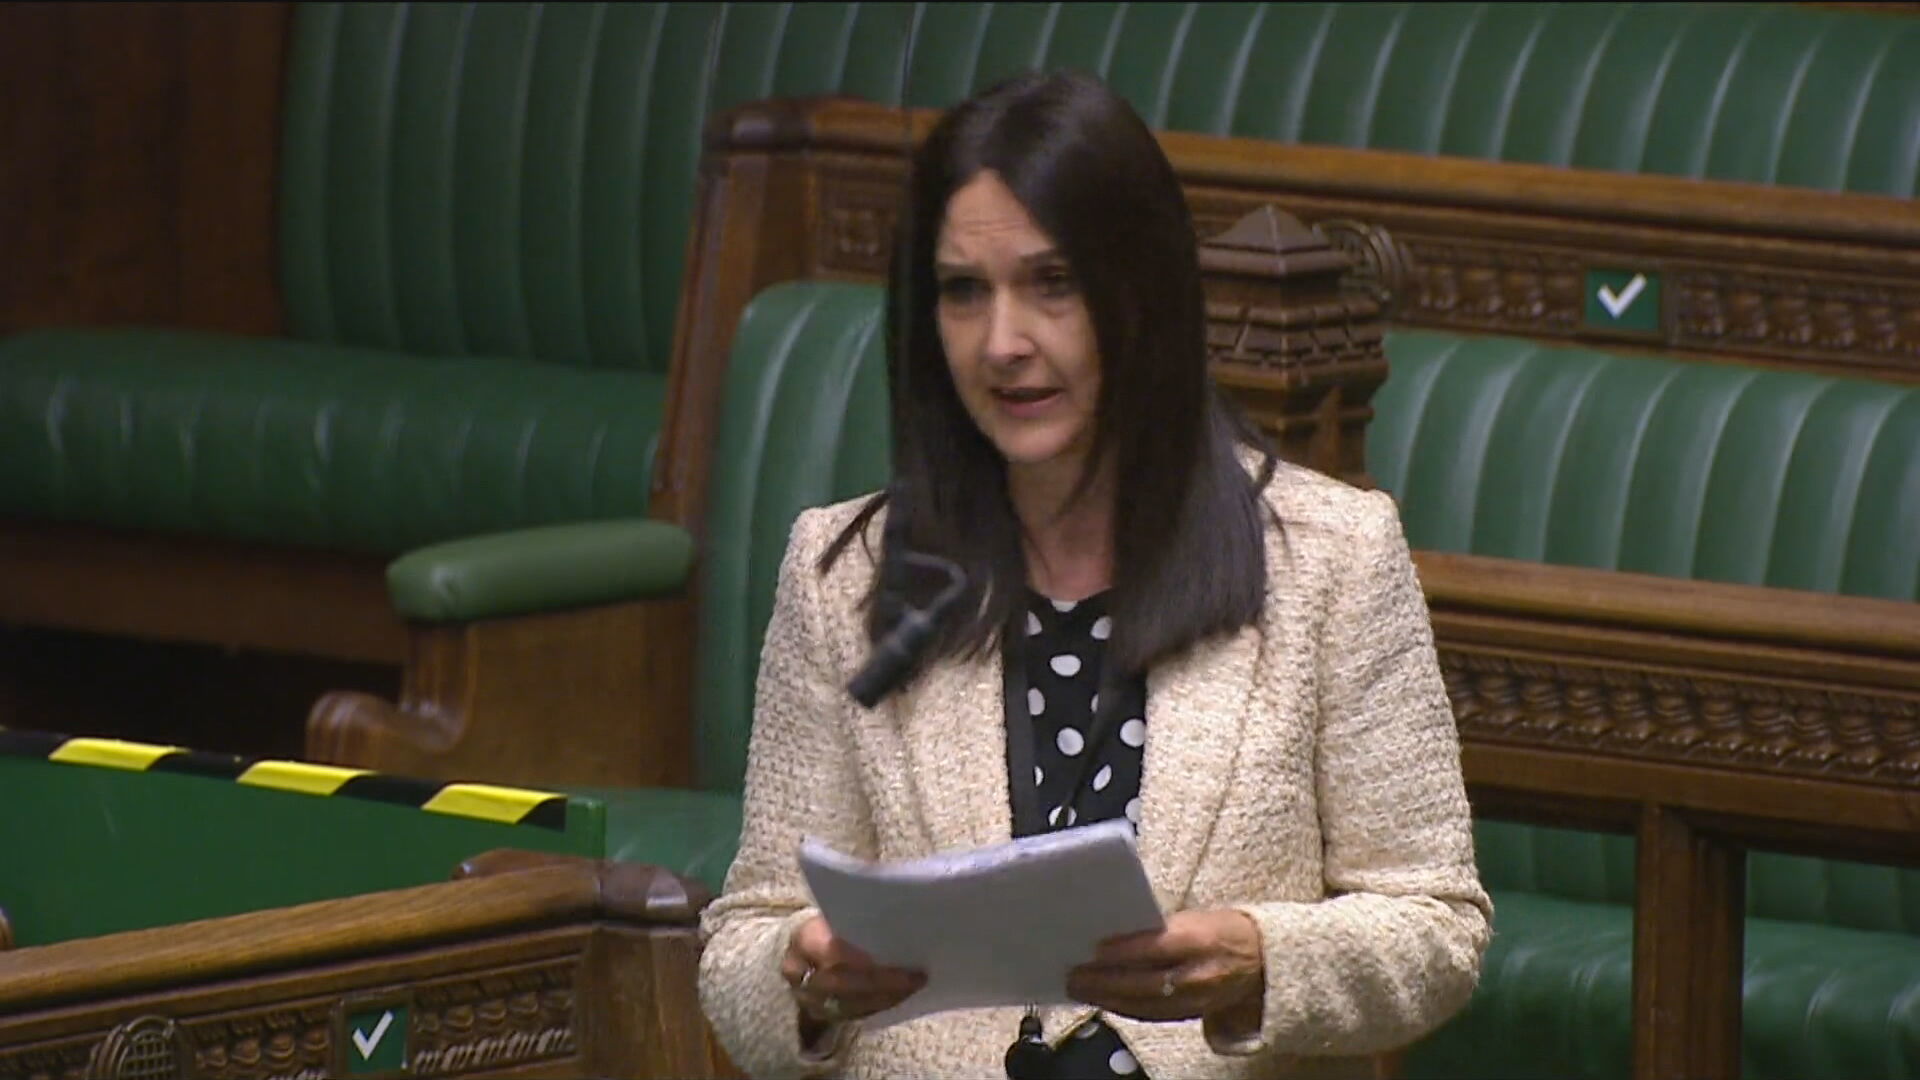 Margaret Ferrier gave a speech in the Commons while awaiting the result of a Covid-19 test.